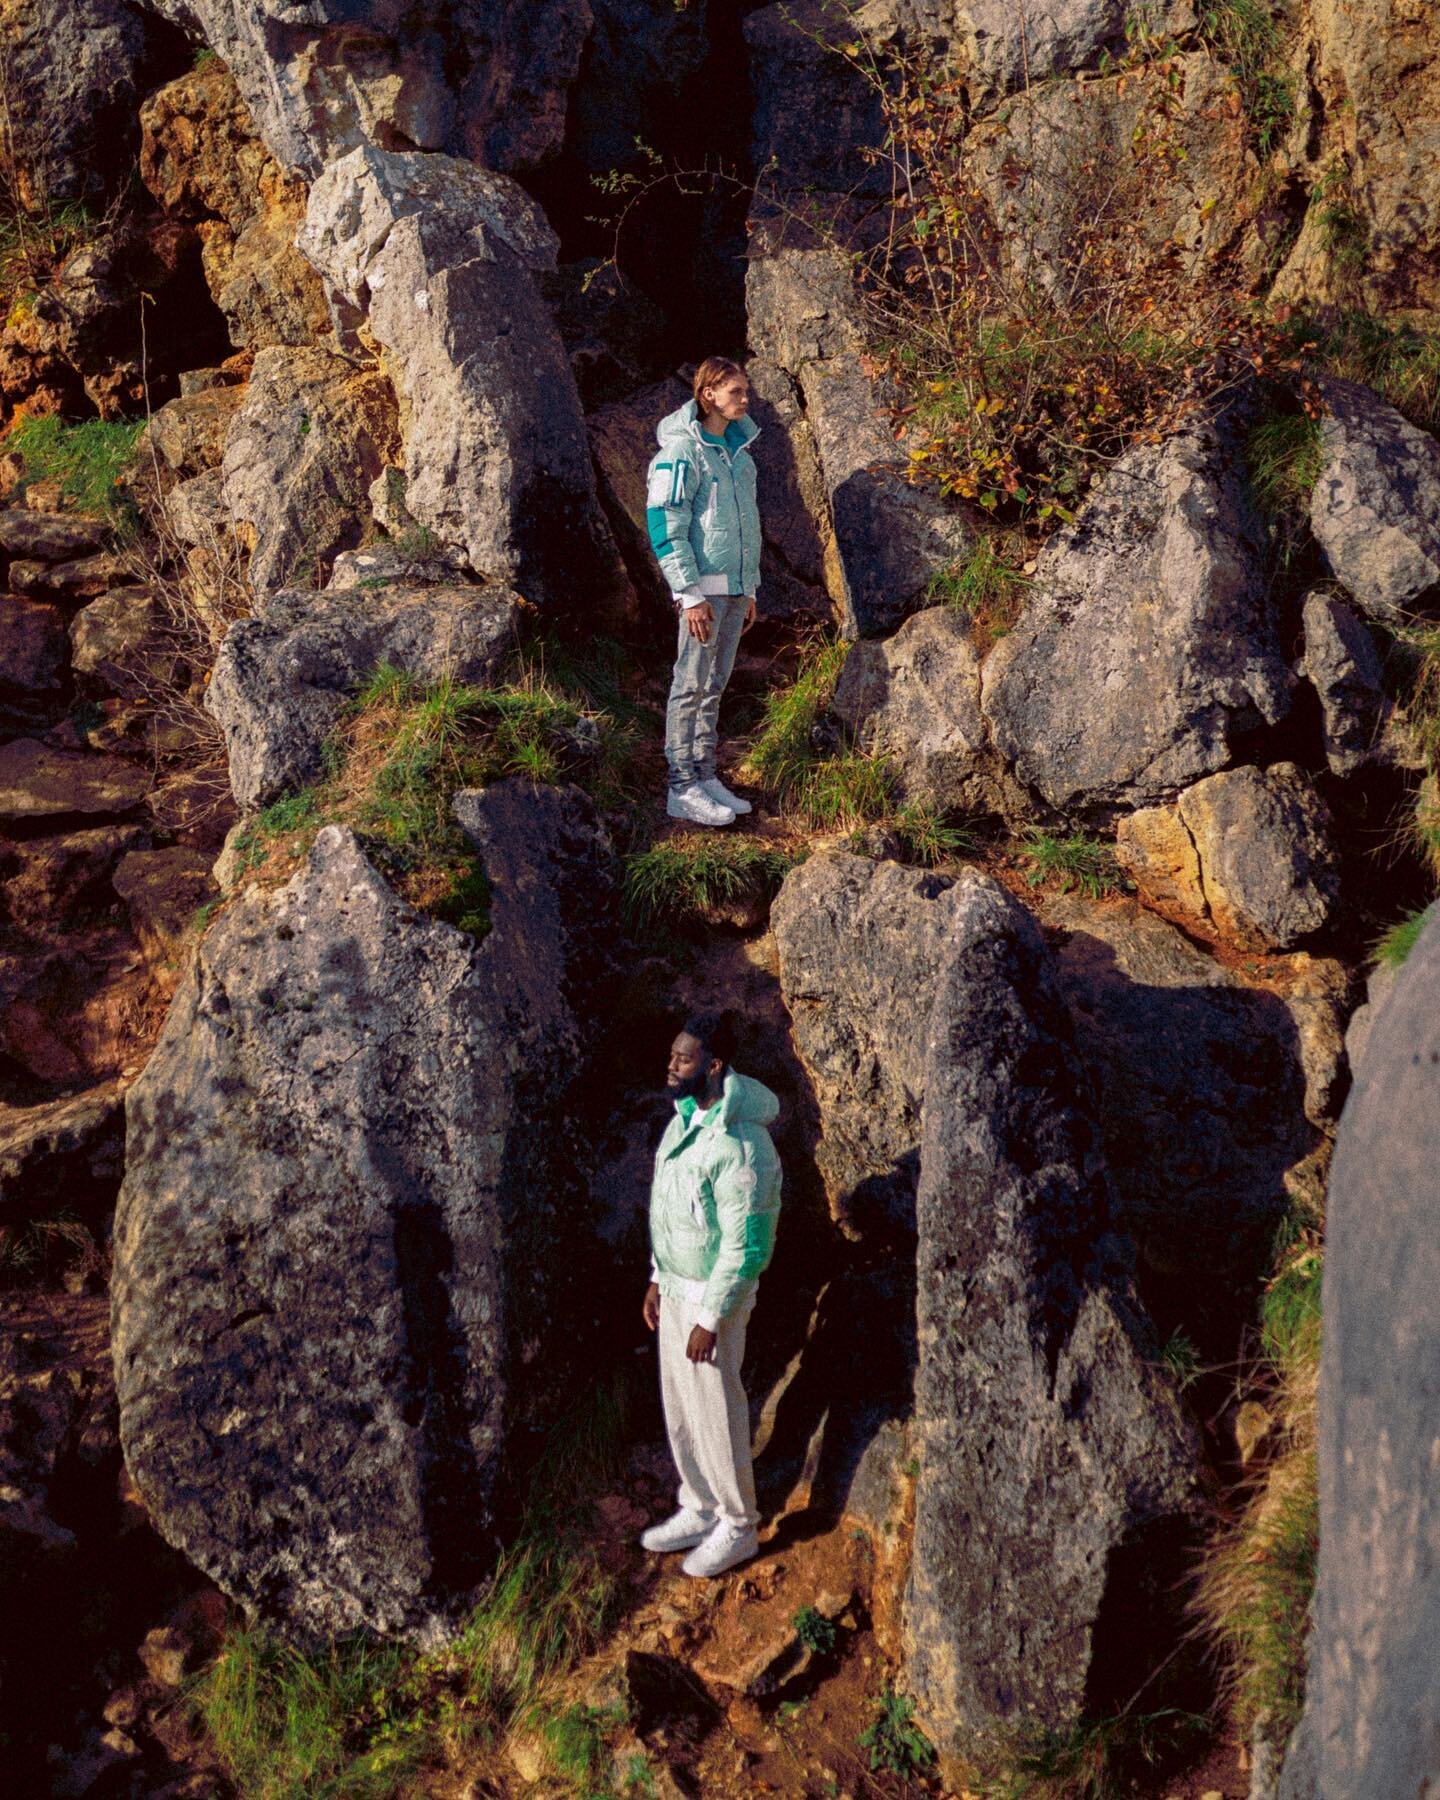 // Canada Goose X-Ray Collection // 

@canadagoose for @fouramsterdam 
Special Thanks to @yvettevalerie_ &amp; the @canadagoose team for trusting me, not to forgot a big shoutout to the models for risking their lives climbing on these rocks for the p